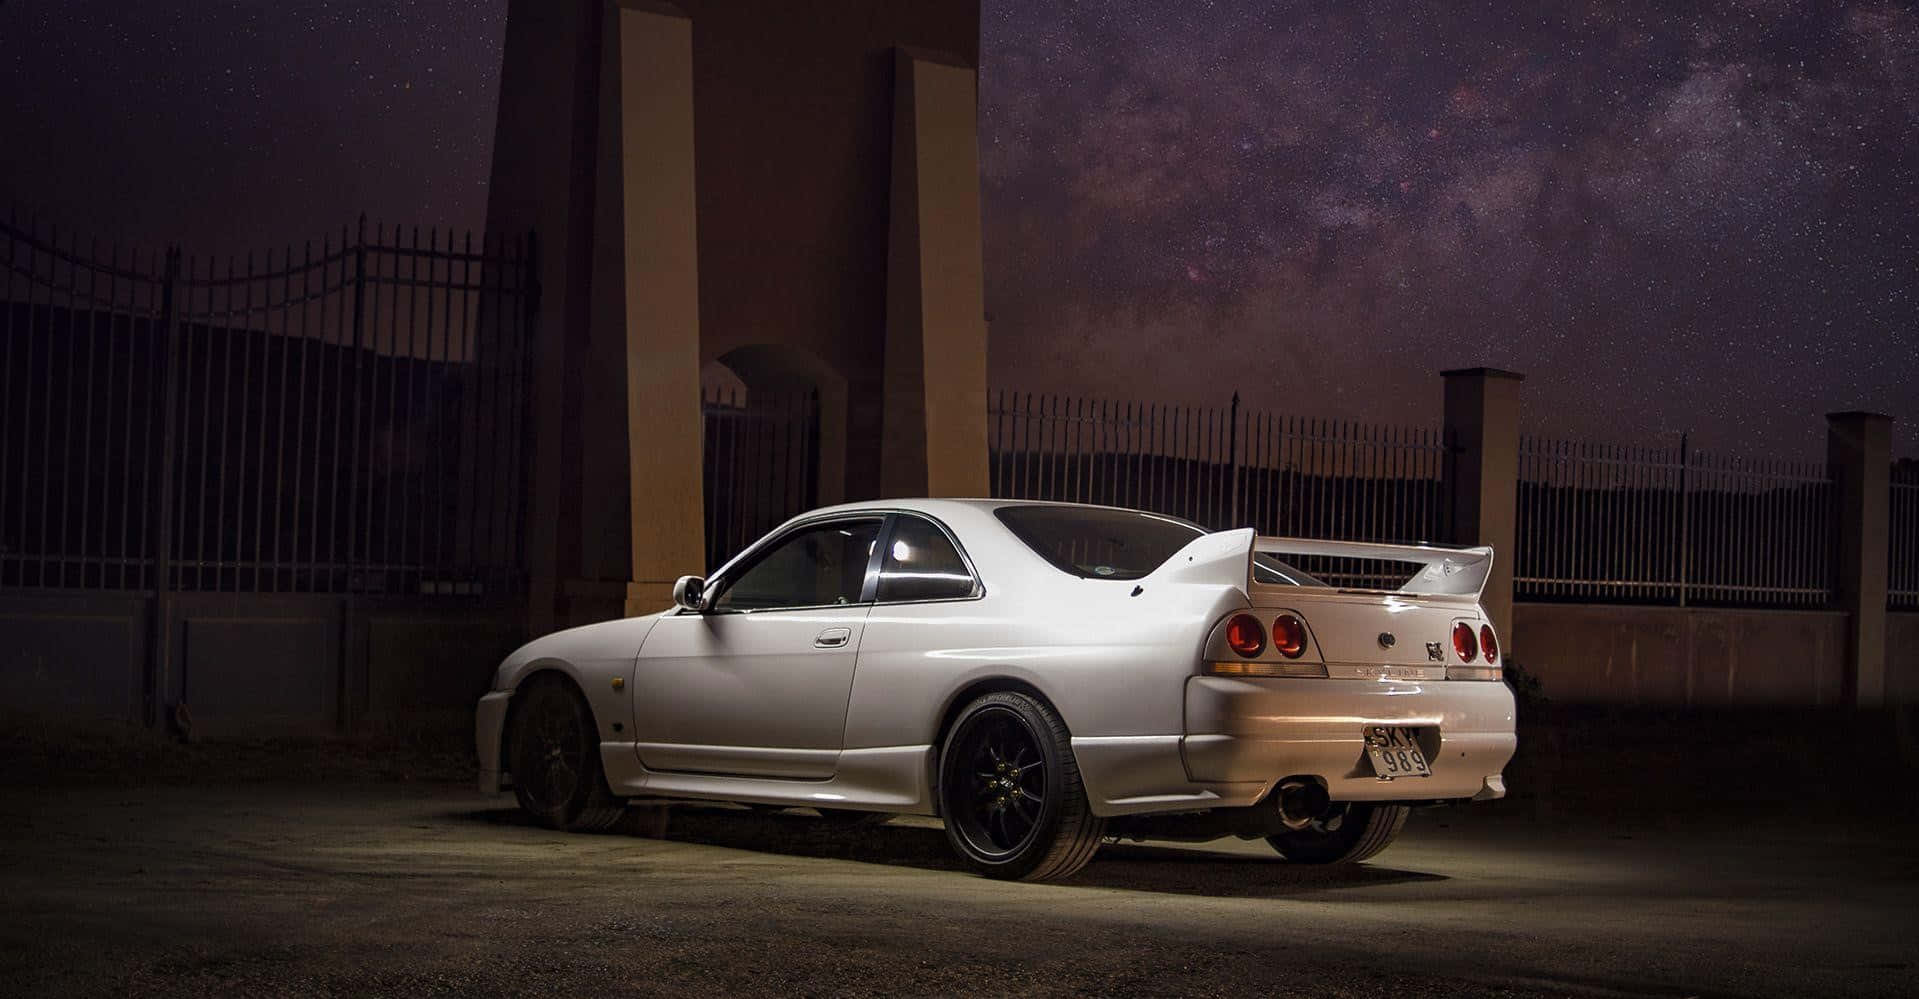 Power And Control Embodied In The Nissan R33 Gtr Wallpaper